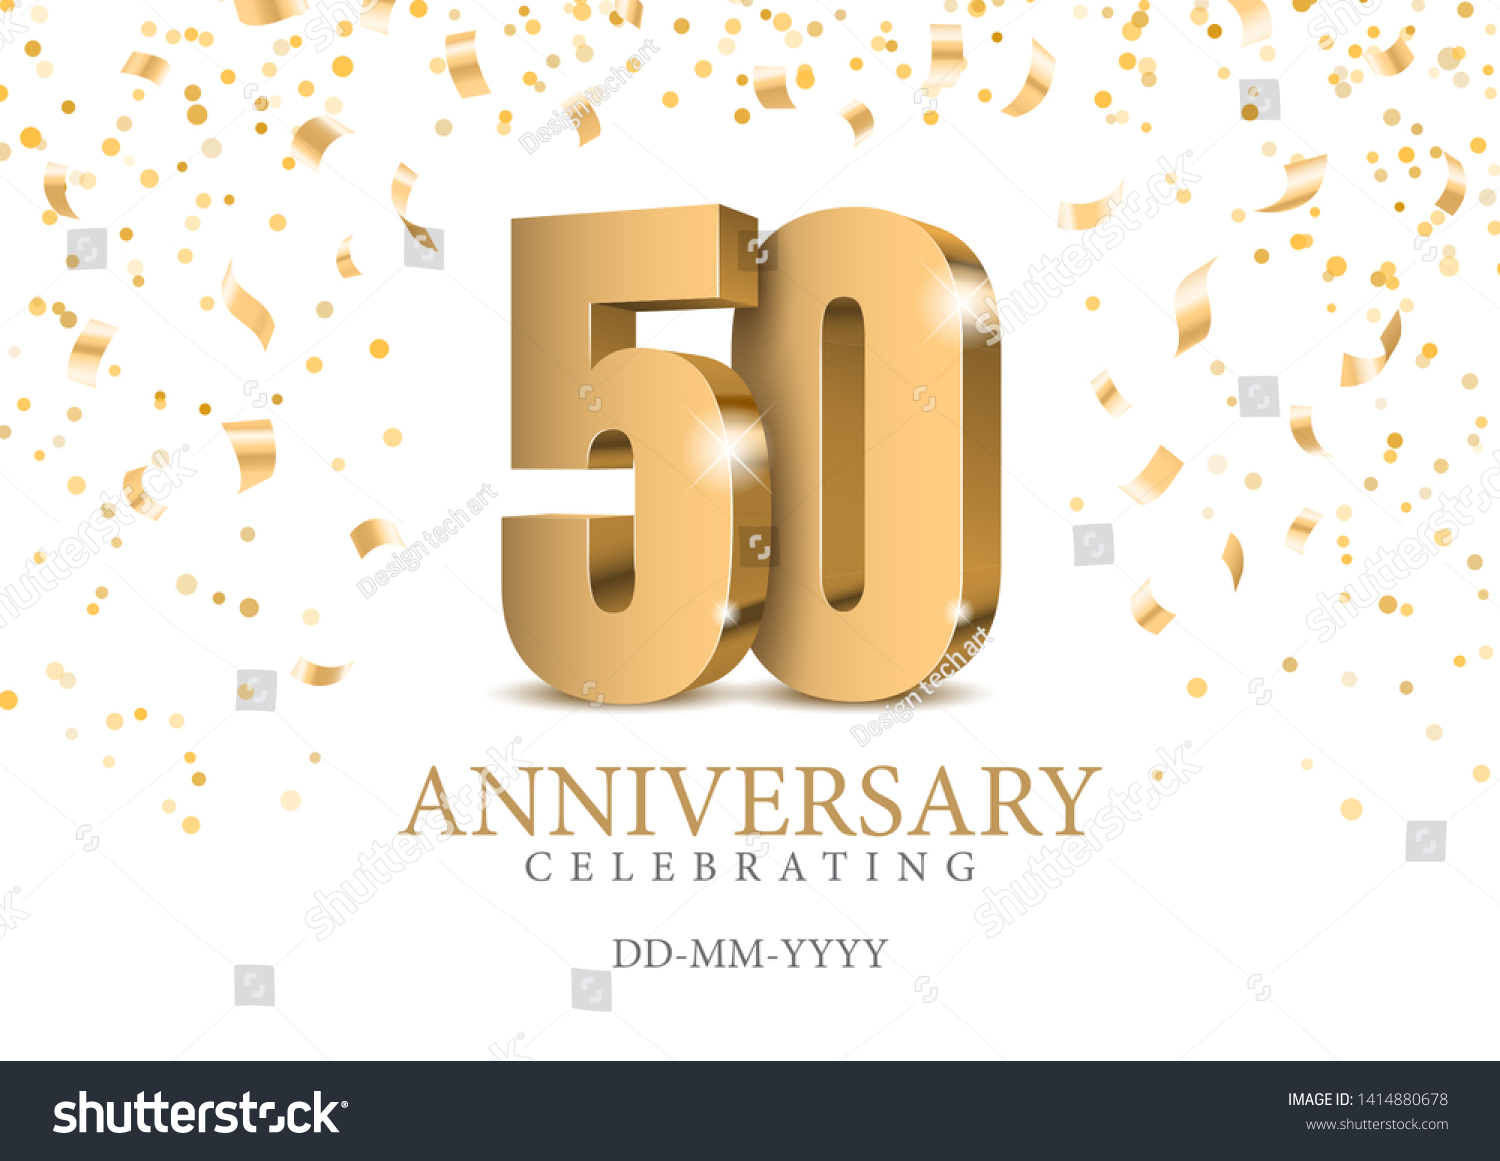 SVG of Anniversary 50. gold 3d numbers. Poster template for Celebrating 50th anniversary event party. Vector illustration svg